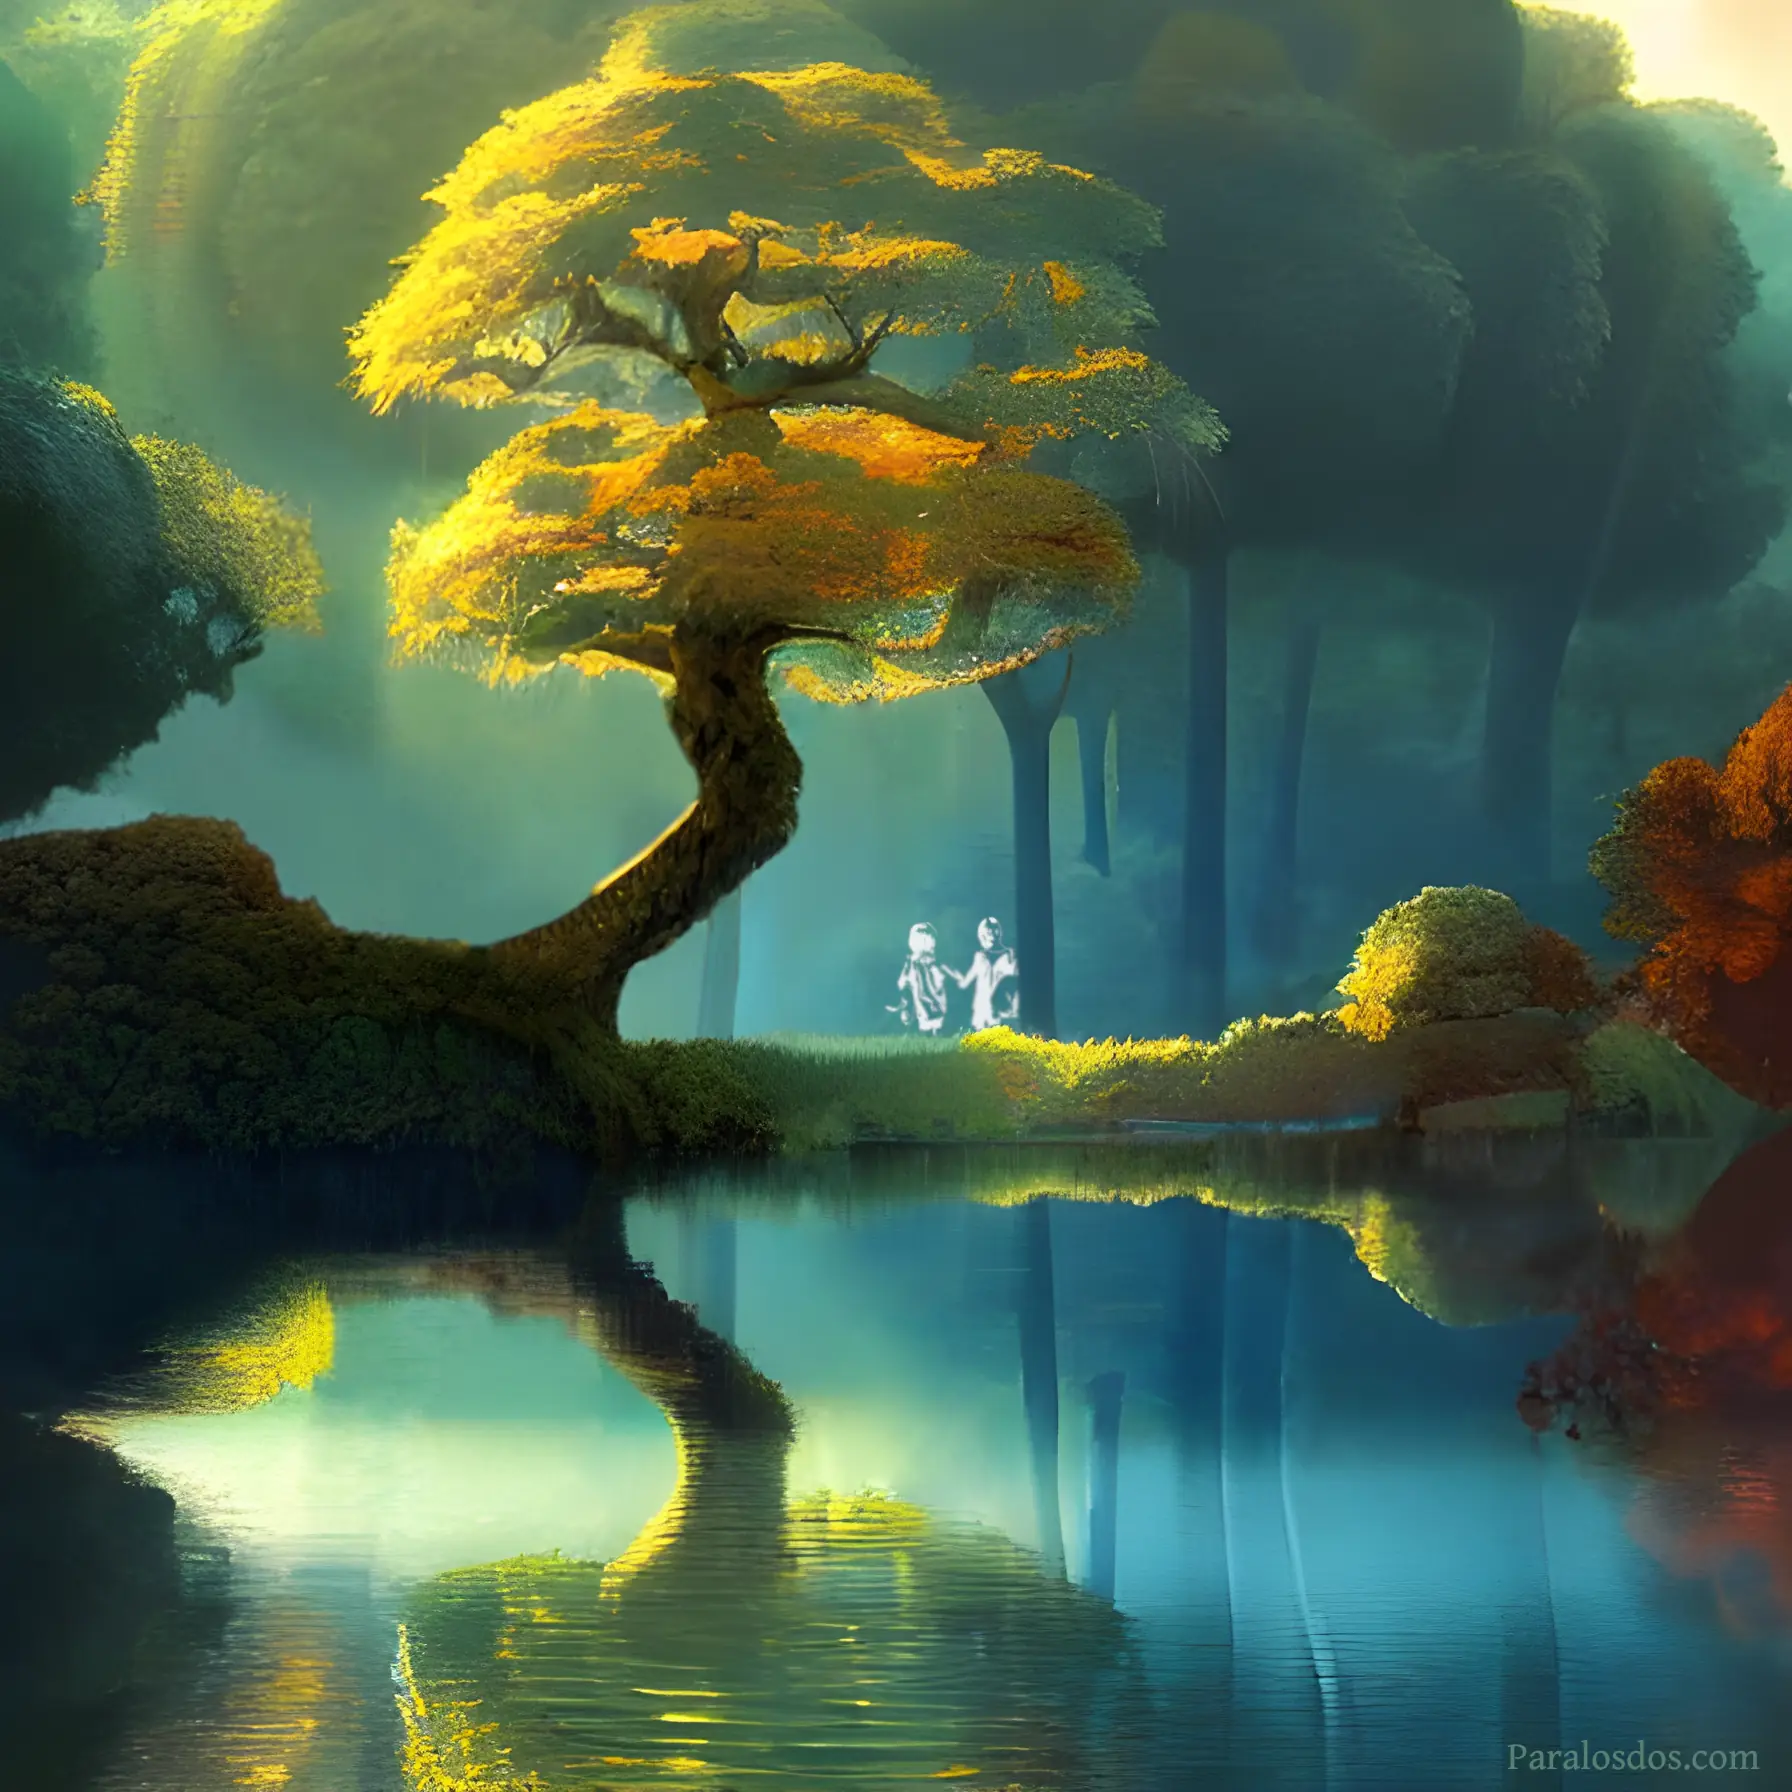 An artistic rendering of a beautiful, peaceful oak tree by a lake or river.